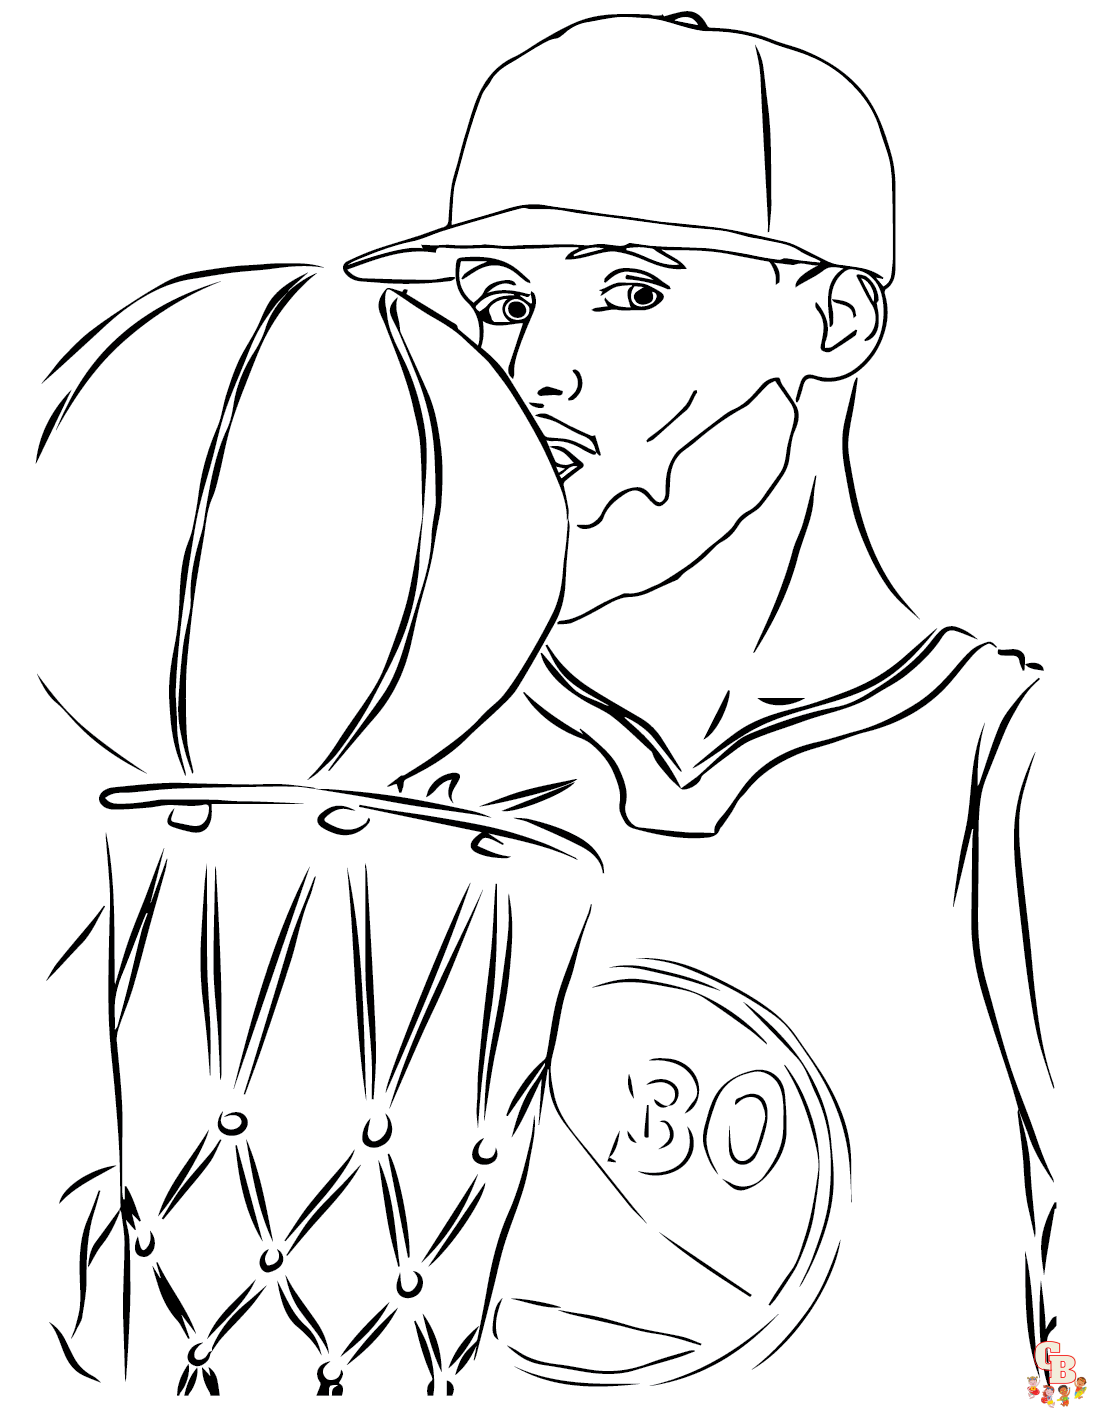 Stephen Curry coloring pages printable free